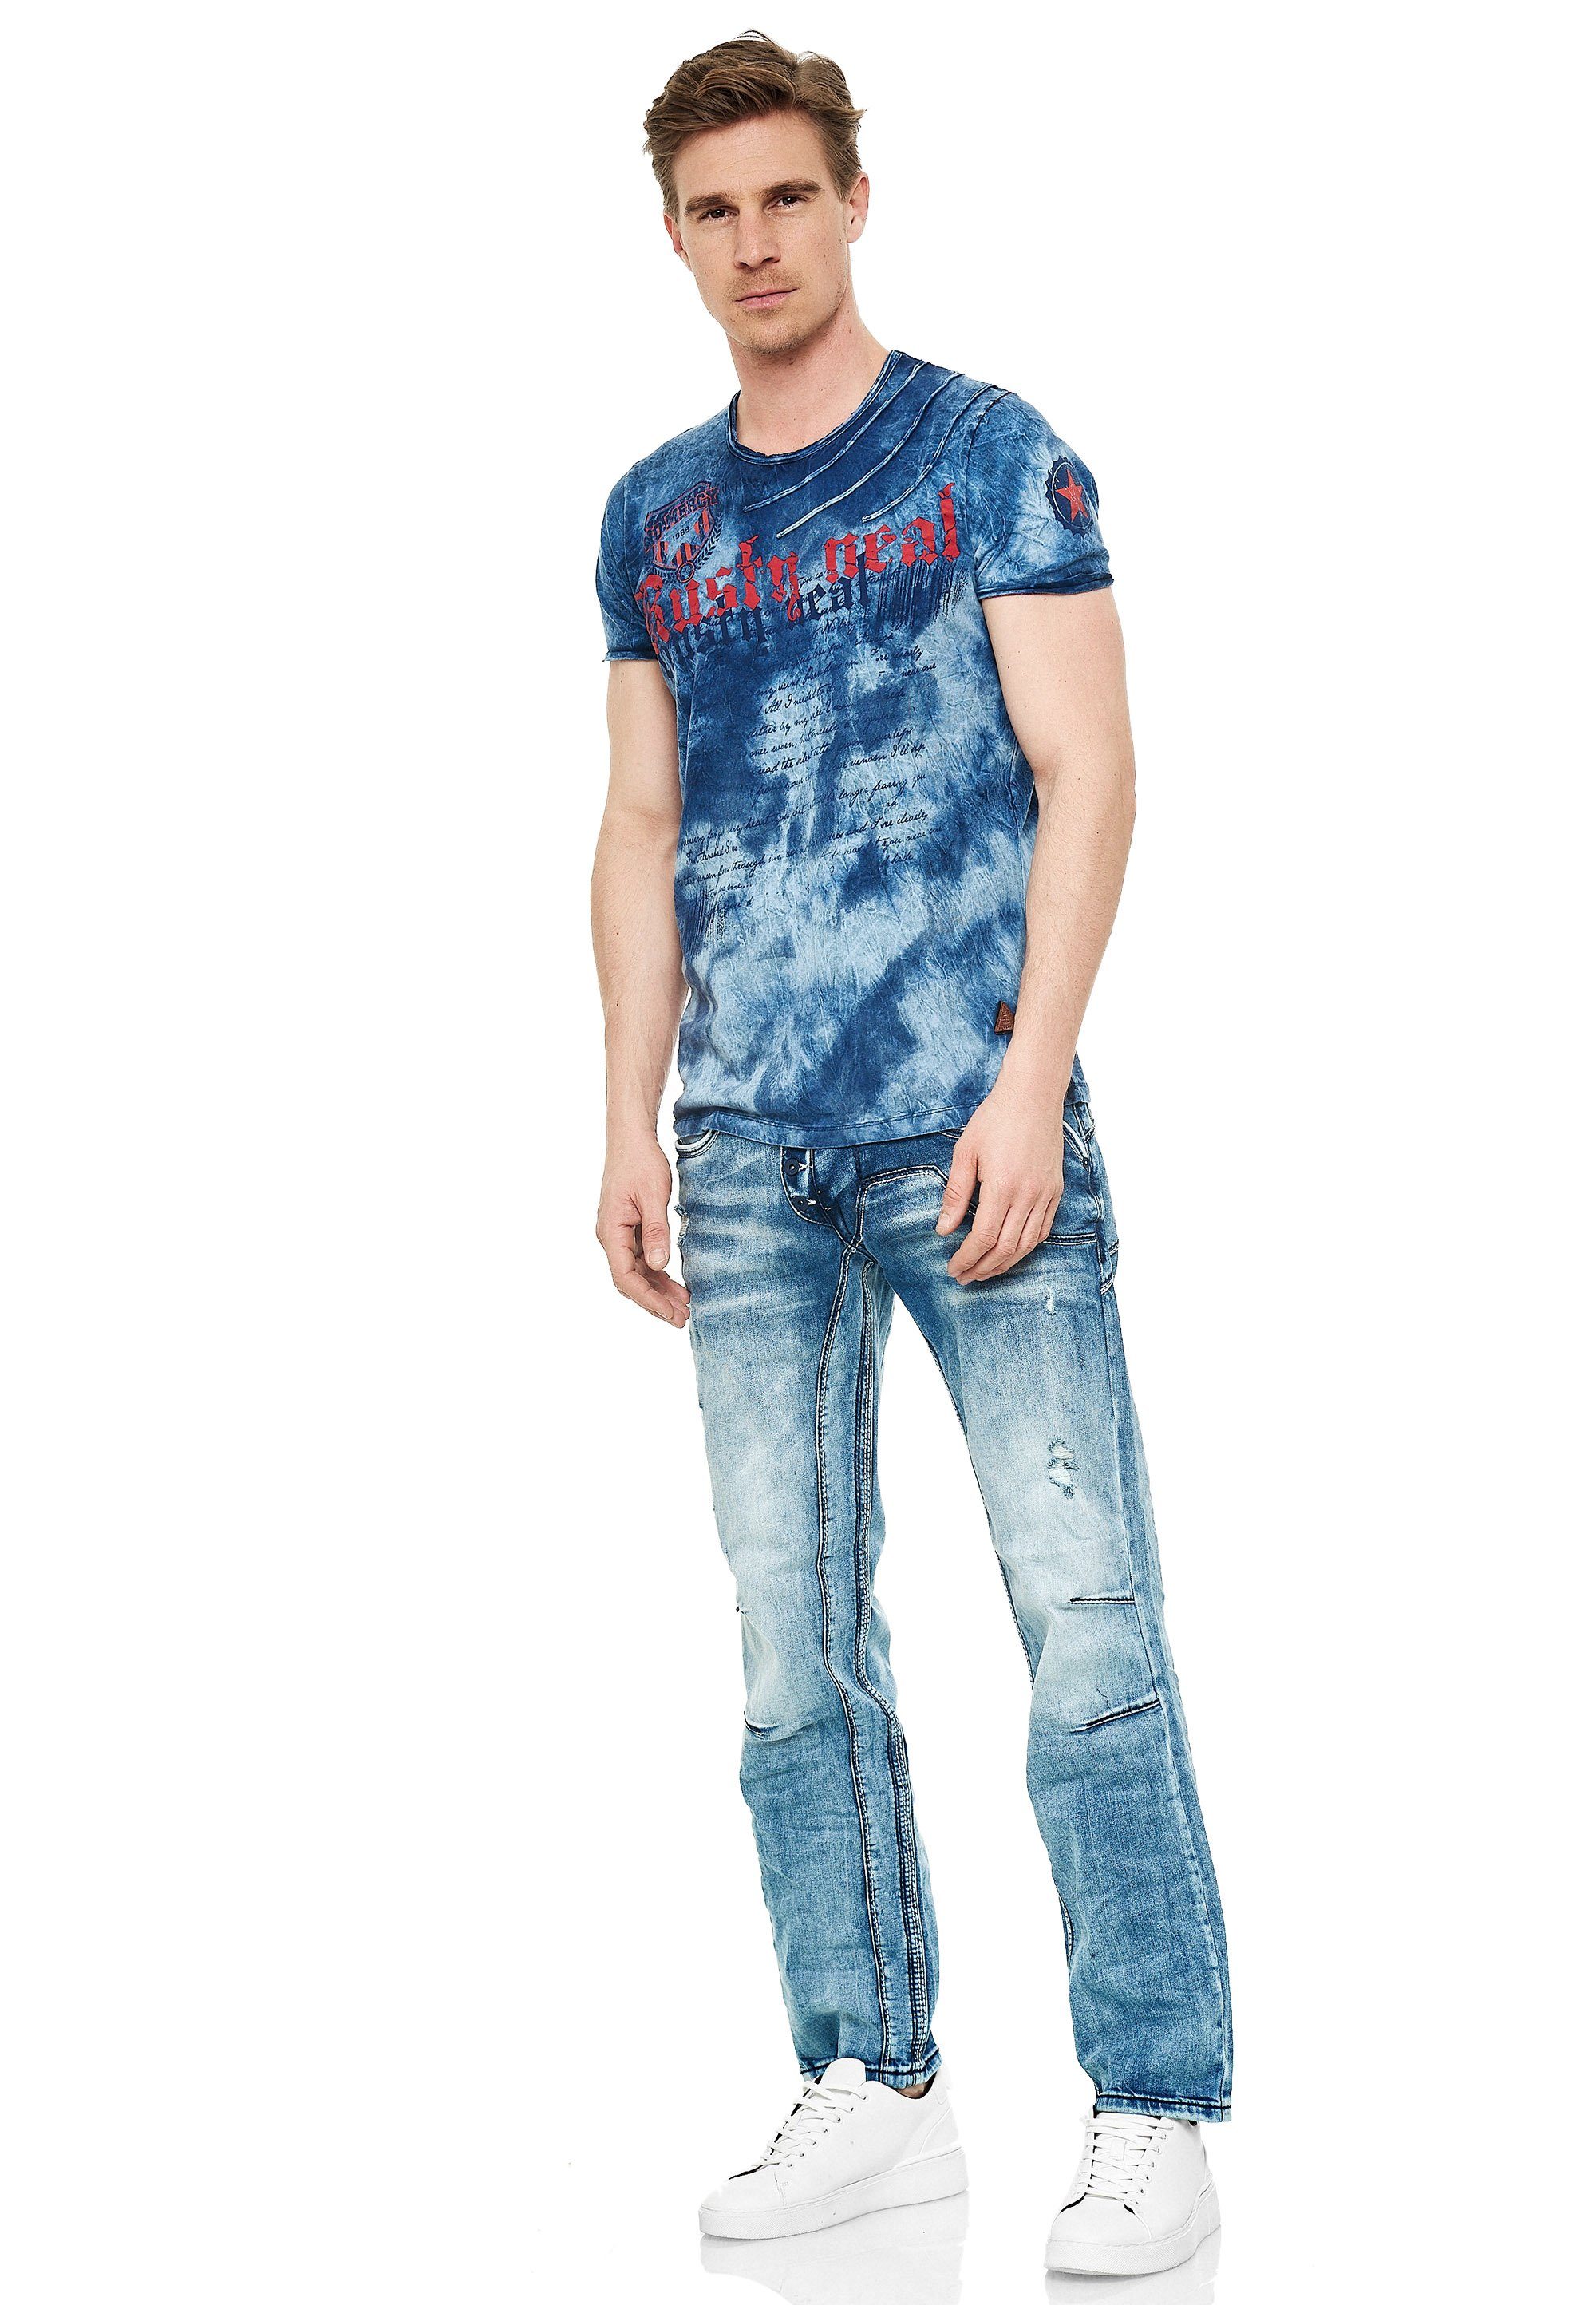 cooler Neal Jeans Bequeme Waschung mit Rusty